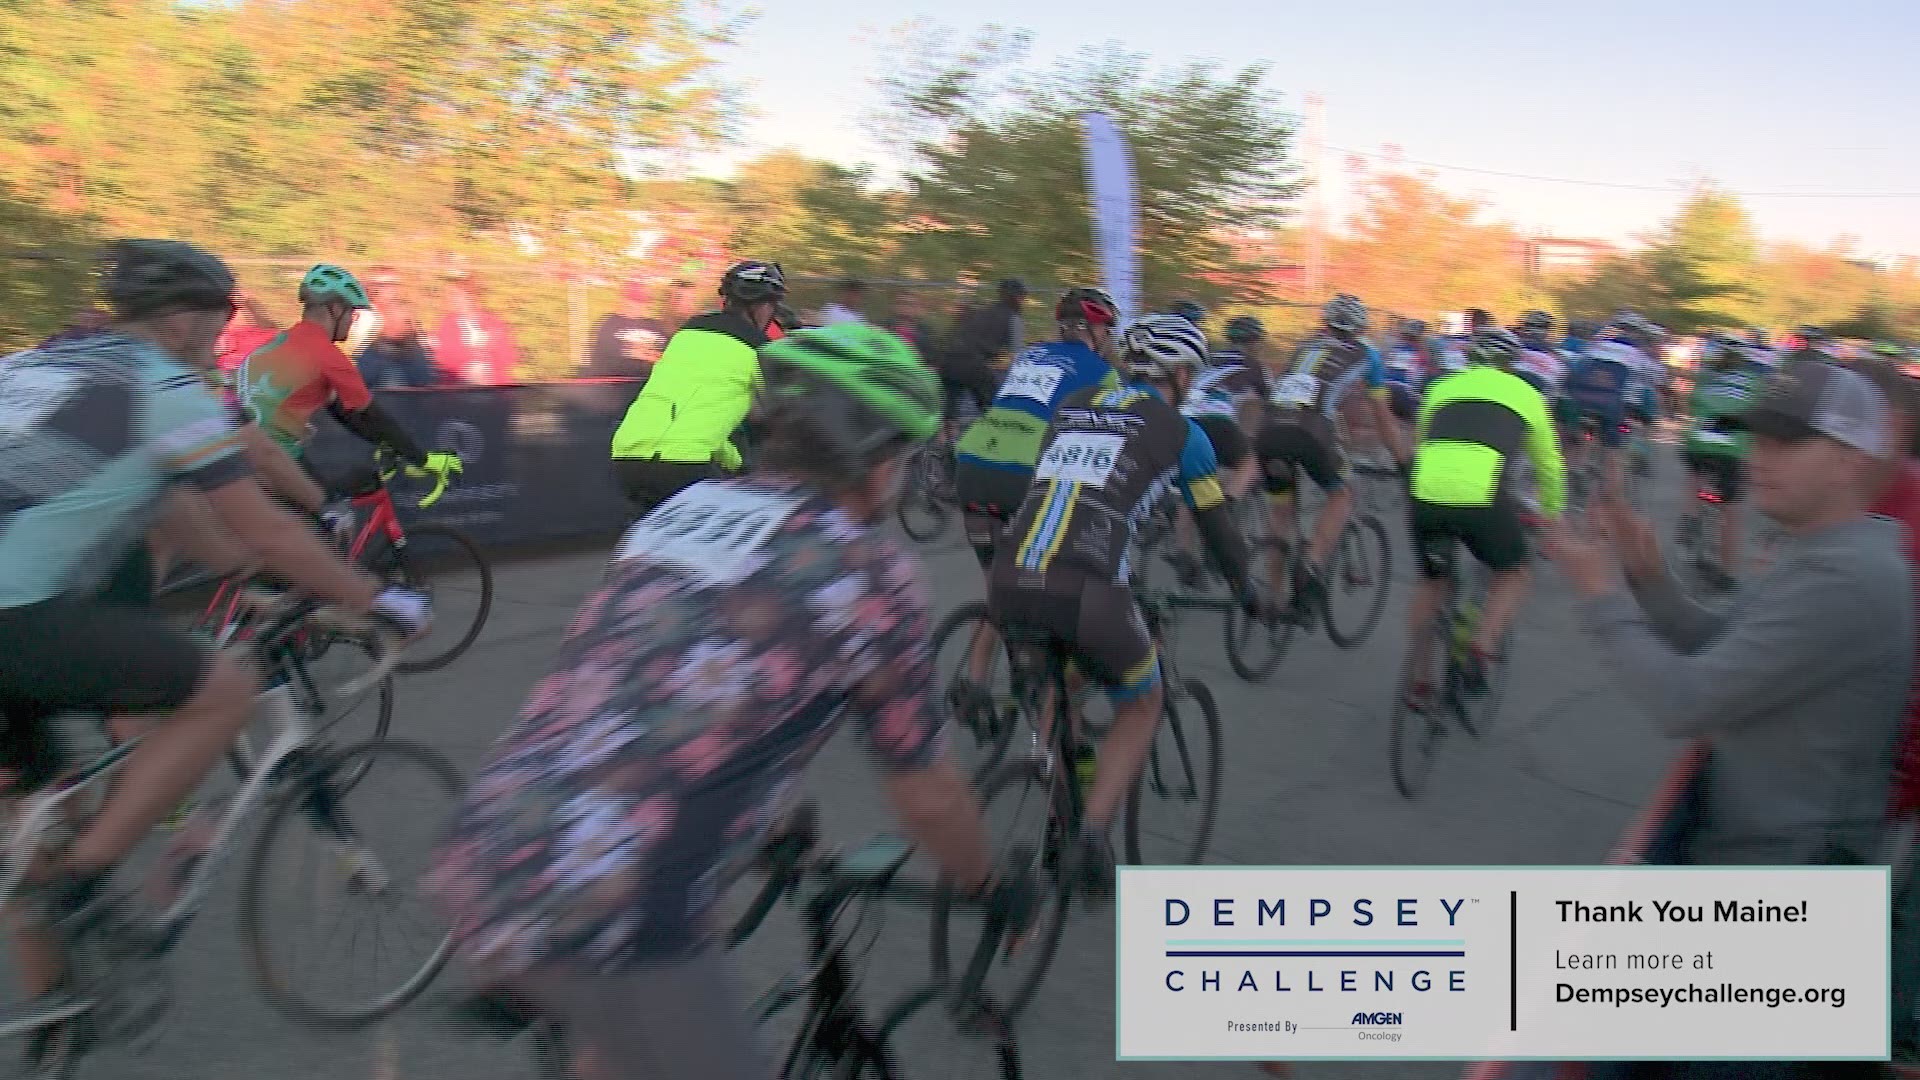 Whether you were running, walking, cycling or there to just cheer on a friend, it was a weekend to help support The Dempsey Center.